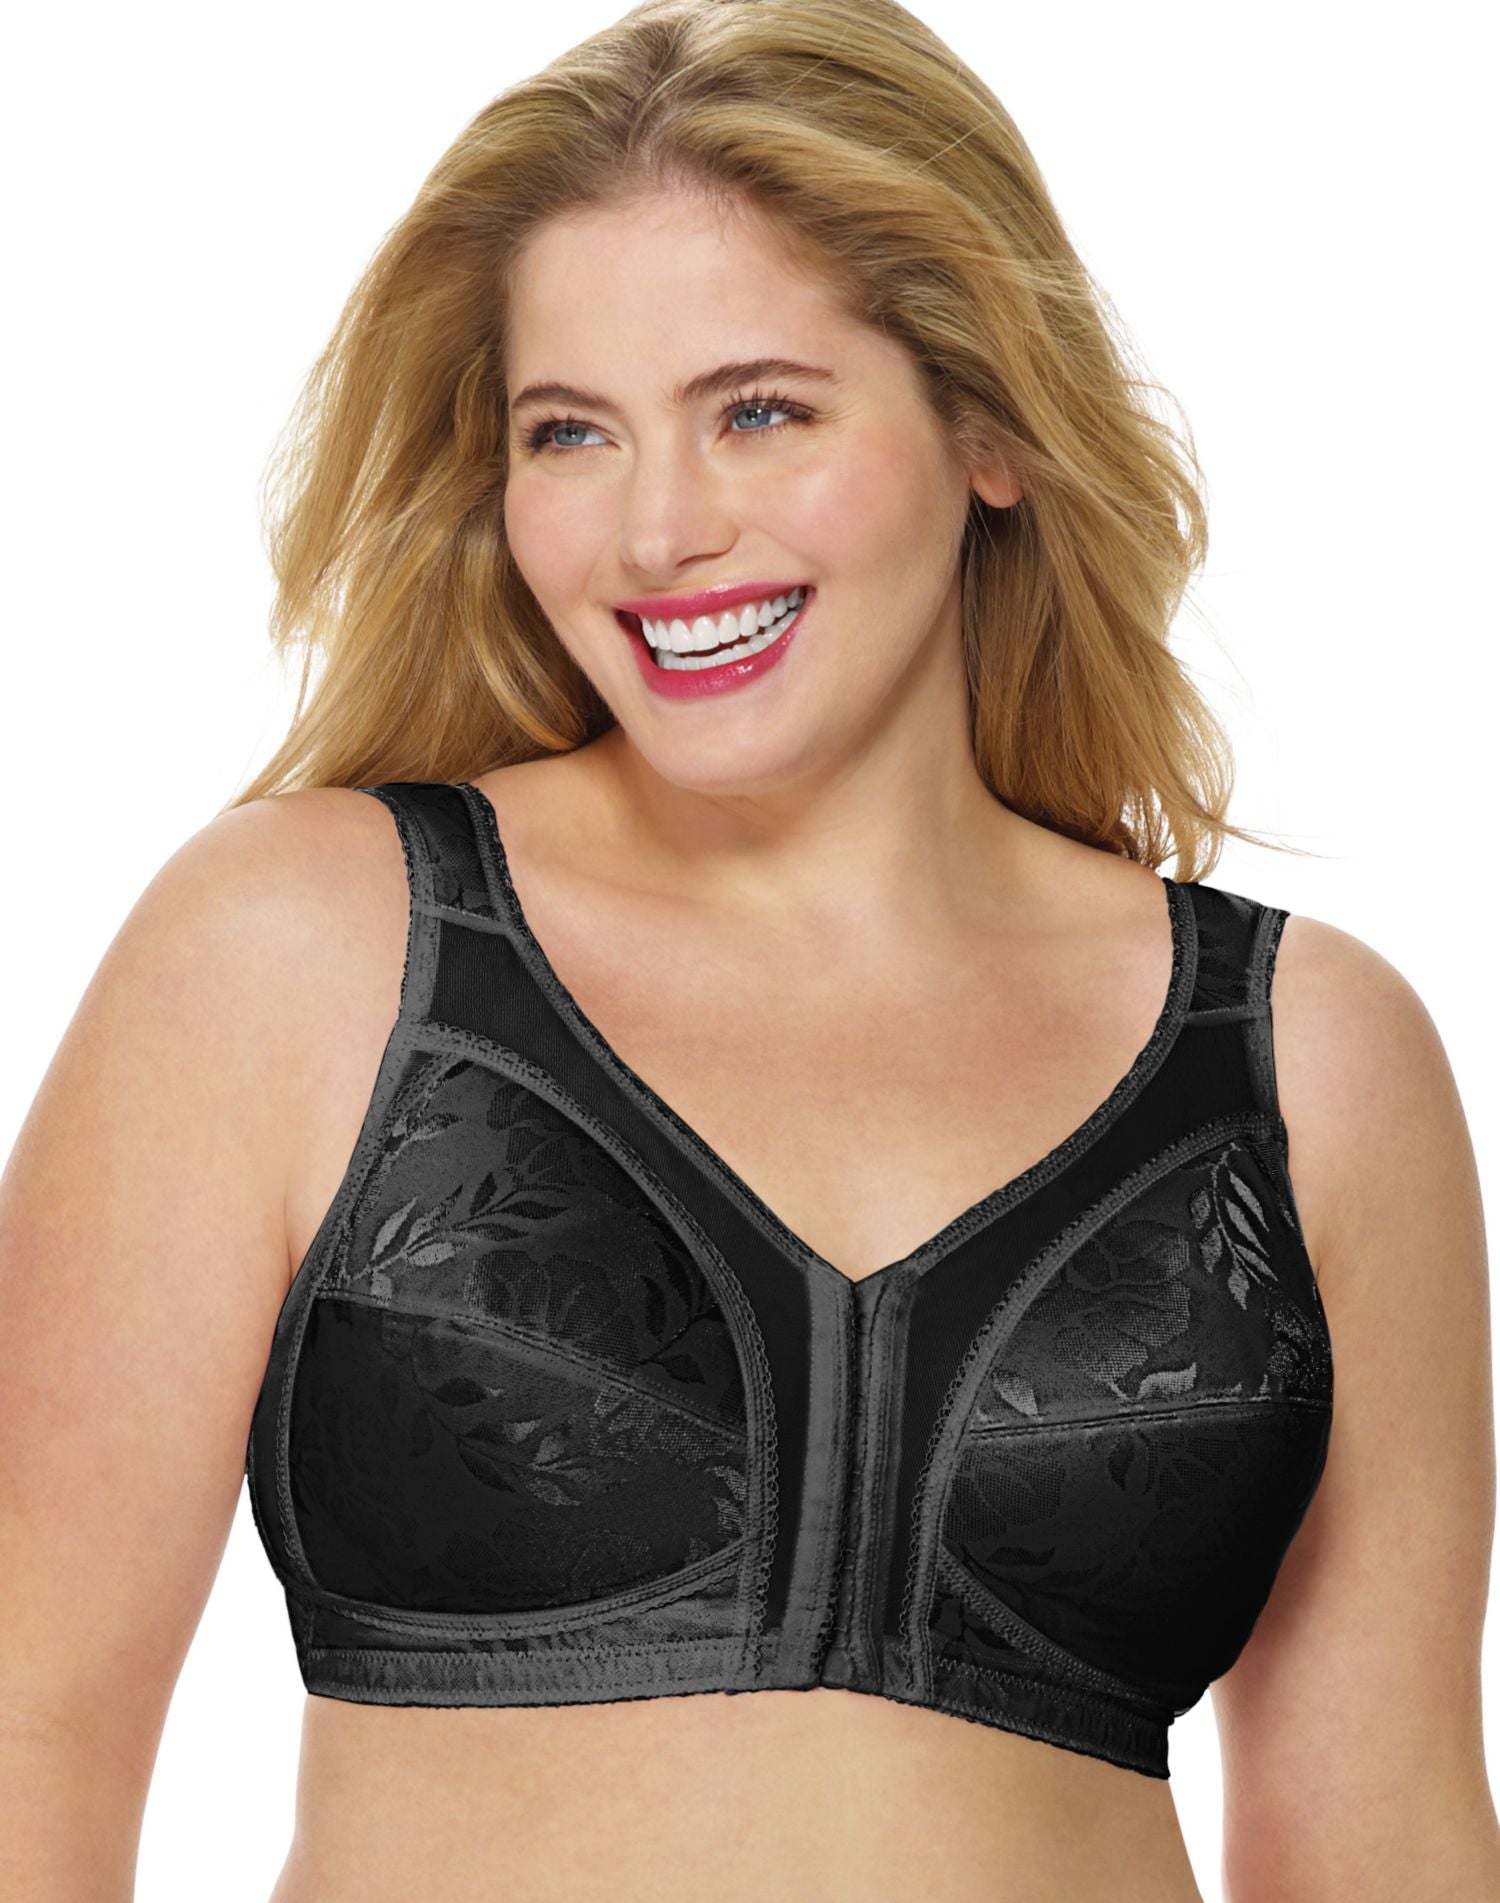 Playtex 18 Hour Supportive Flexible Back 4695 Front Close CHOOSE